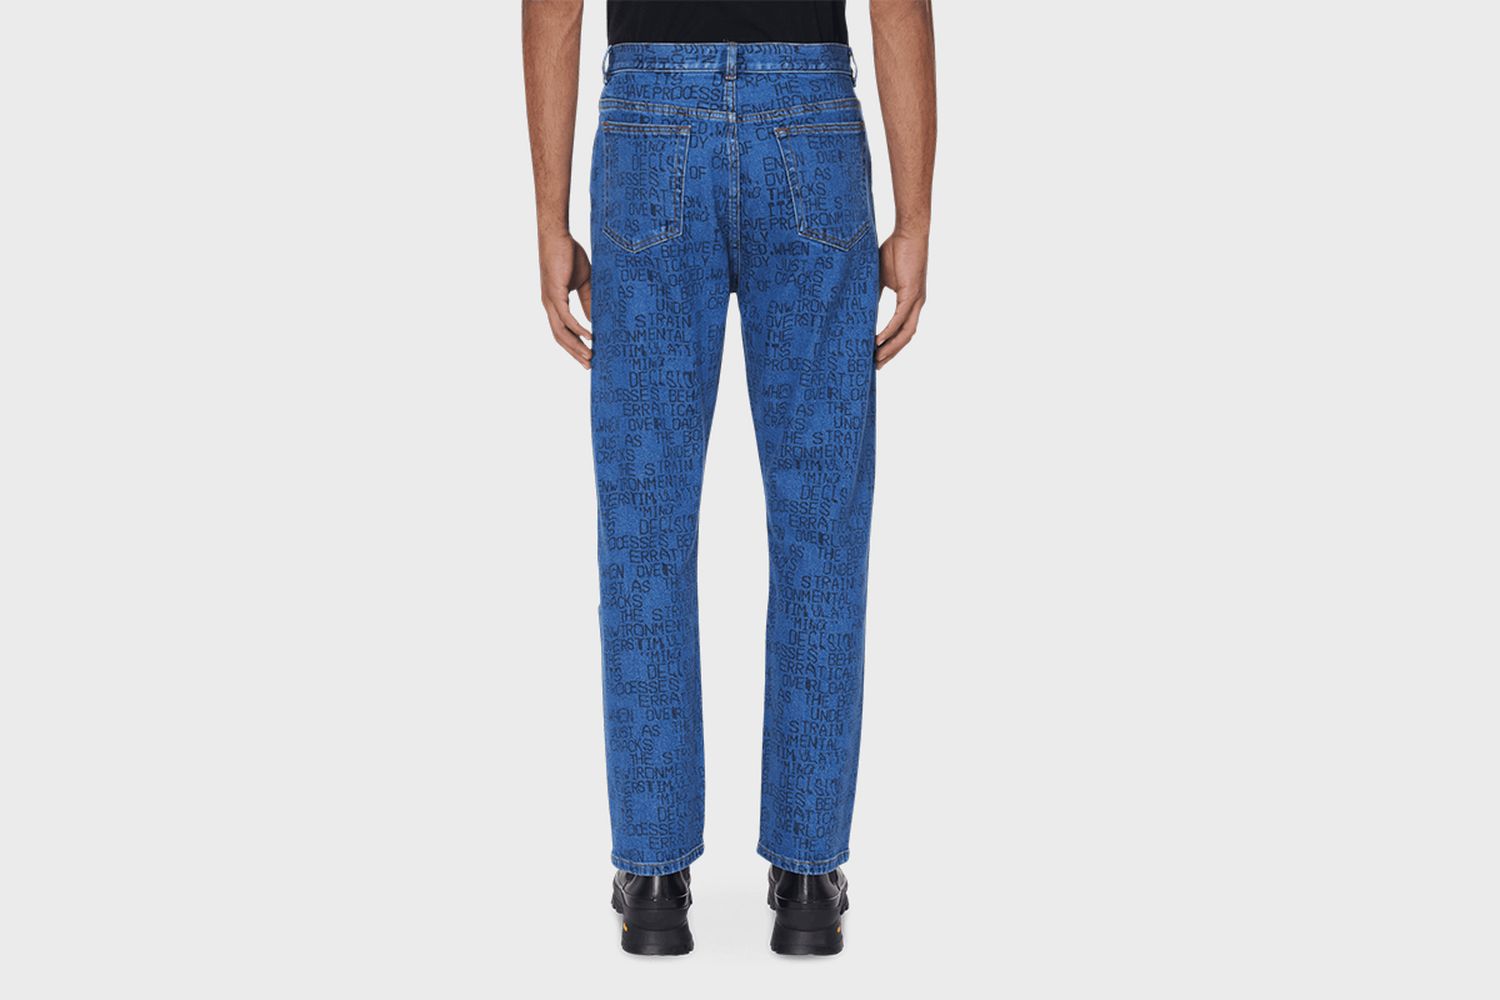 Crypt Jeans